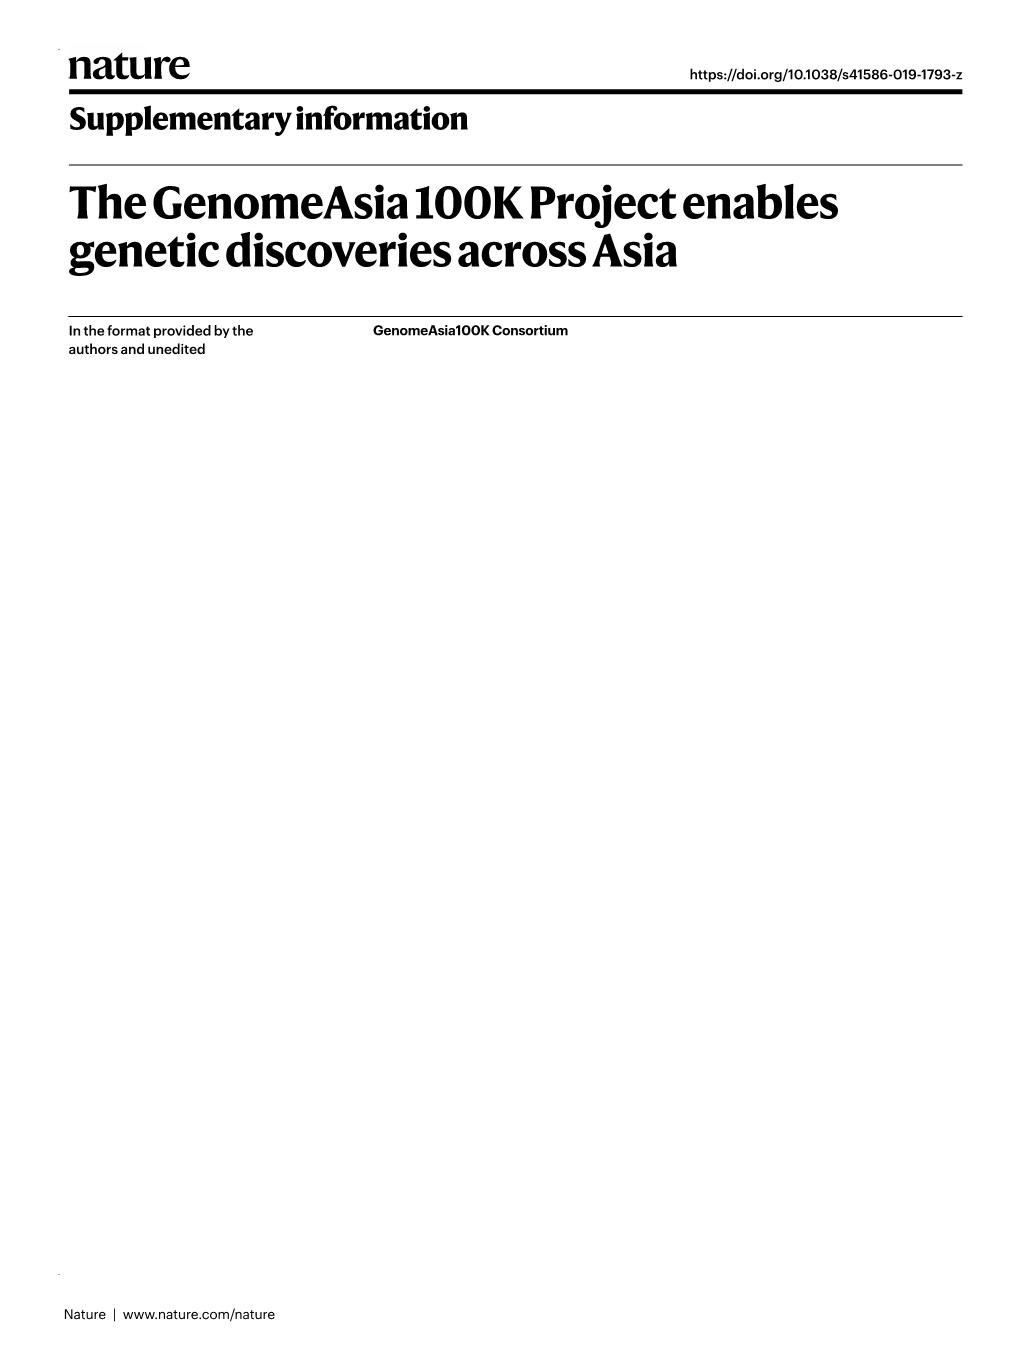 The Genomeasia 100K Project Enables Genetic Discoveries Across Asia